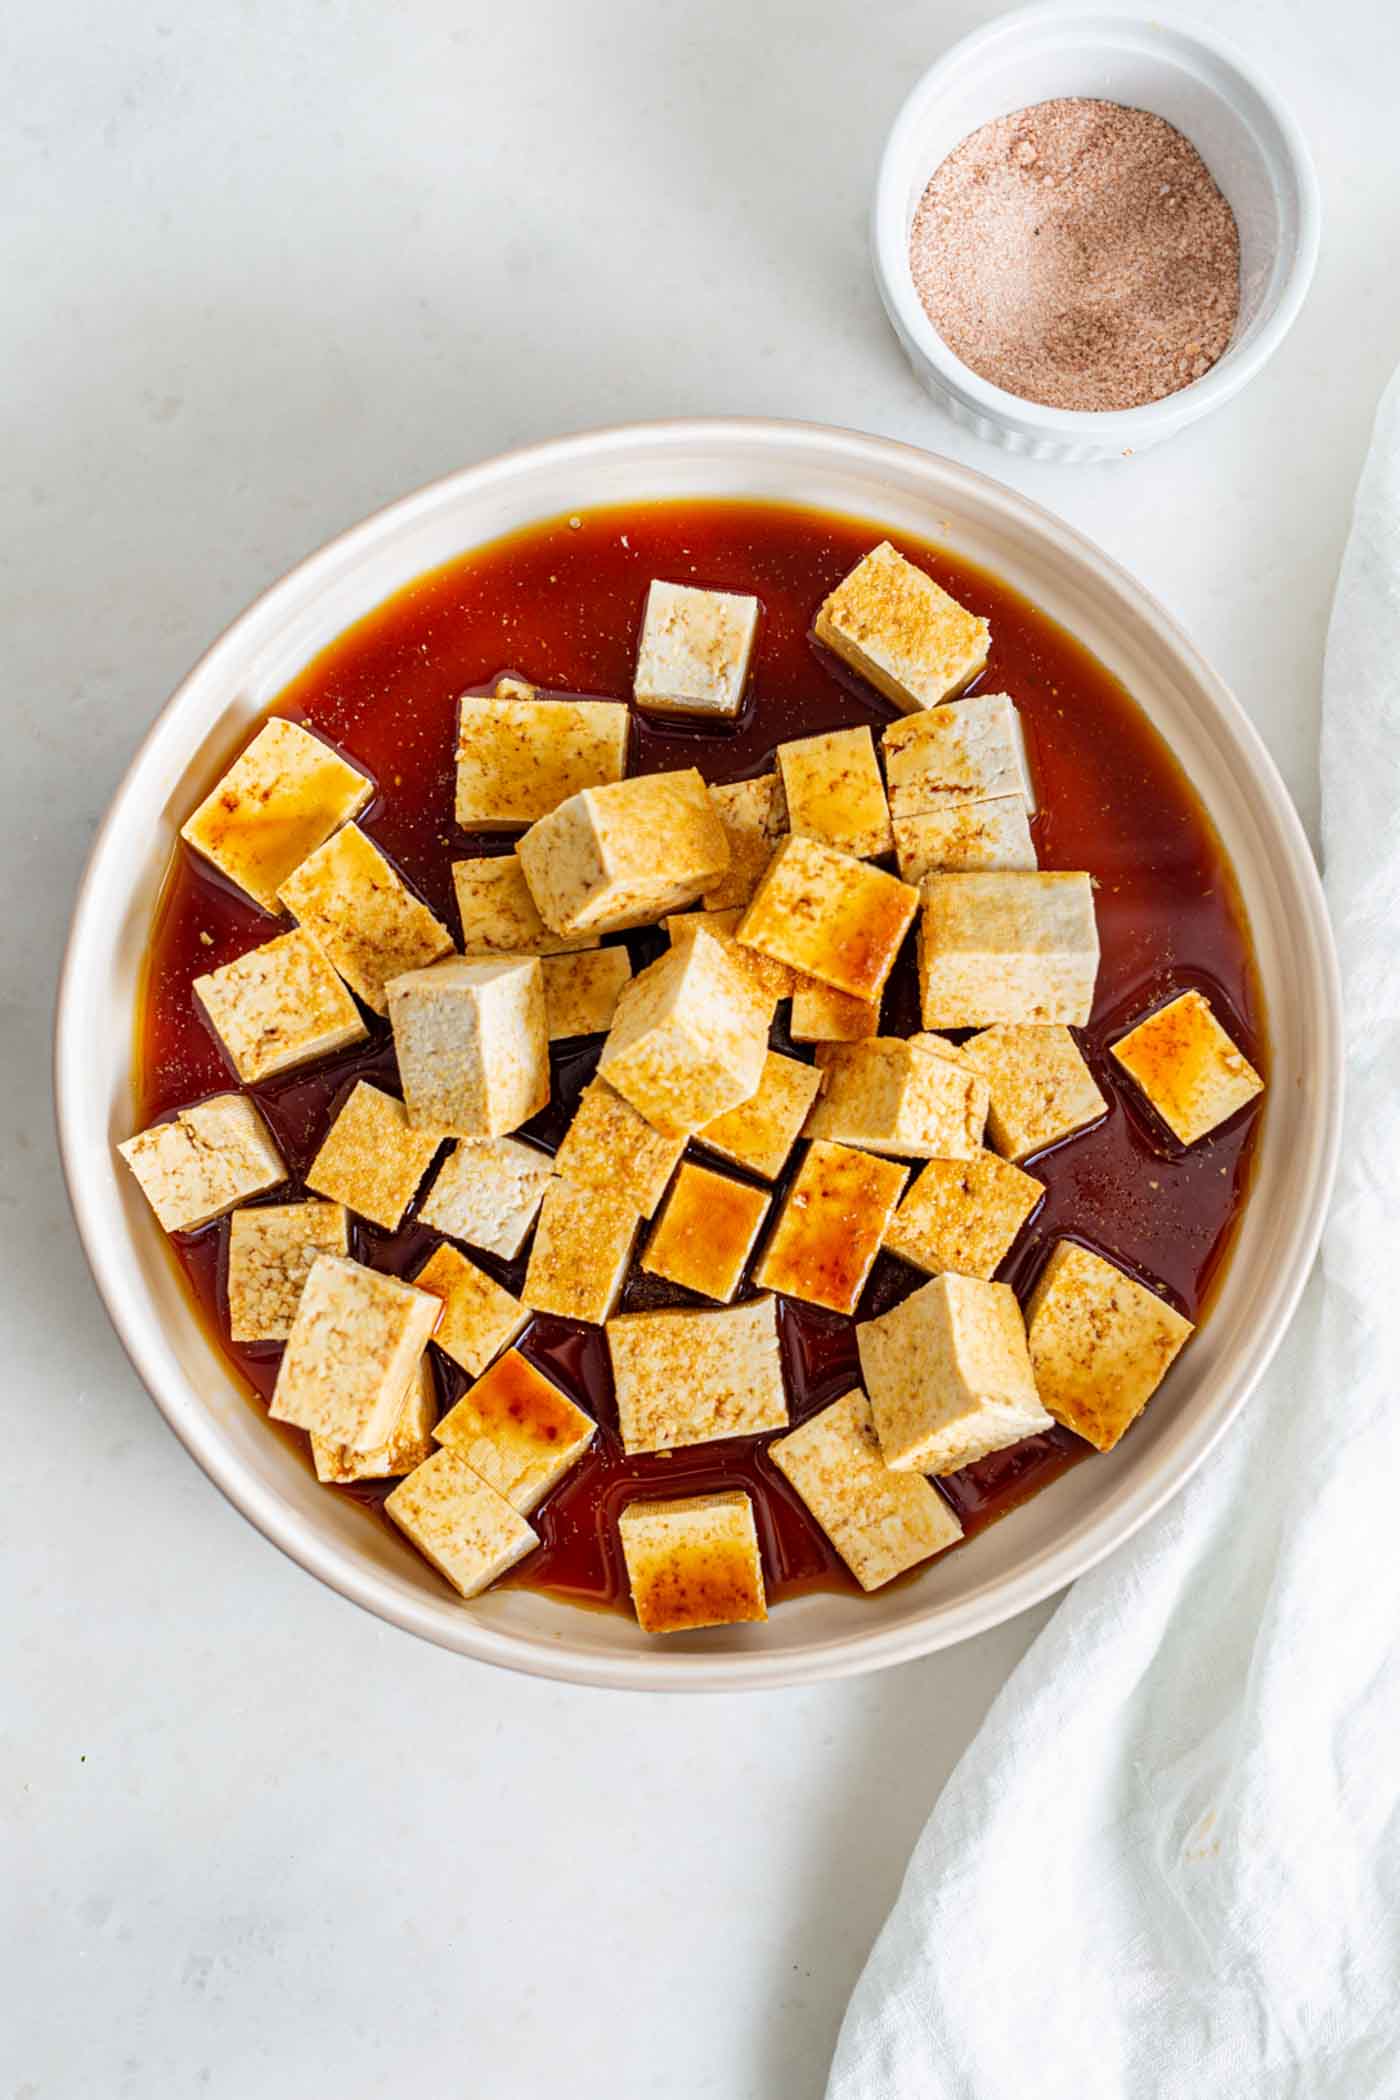 Complete Guide to Tofu - Health Benefits, How to Cook It and More